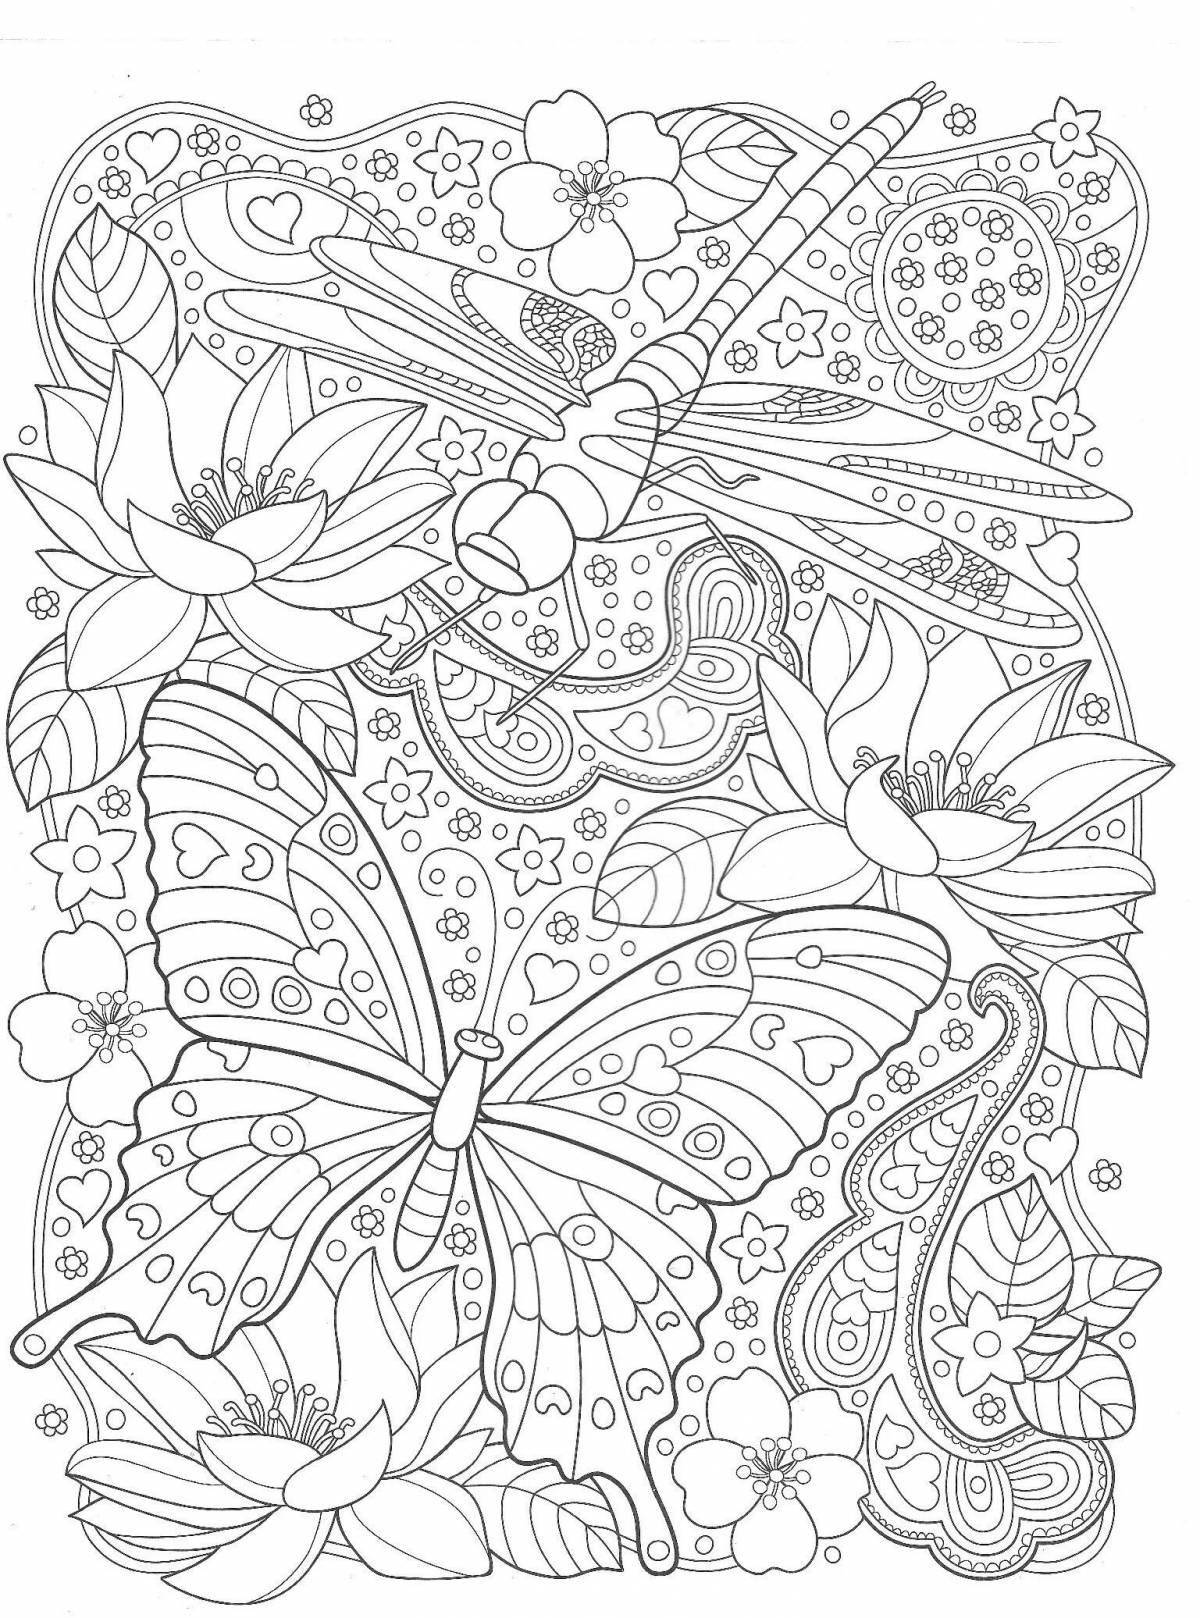 Radiant coloring page adult ru beautiful